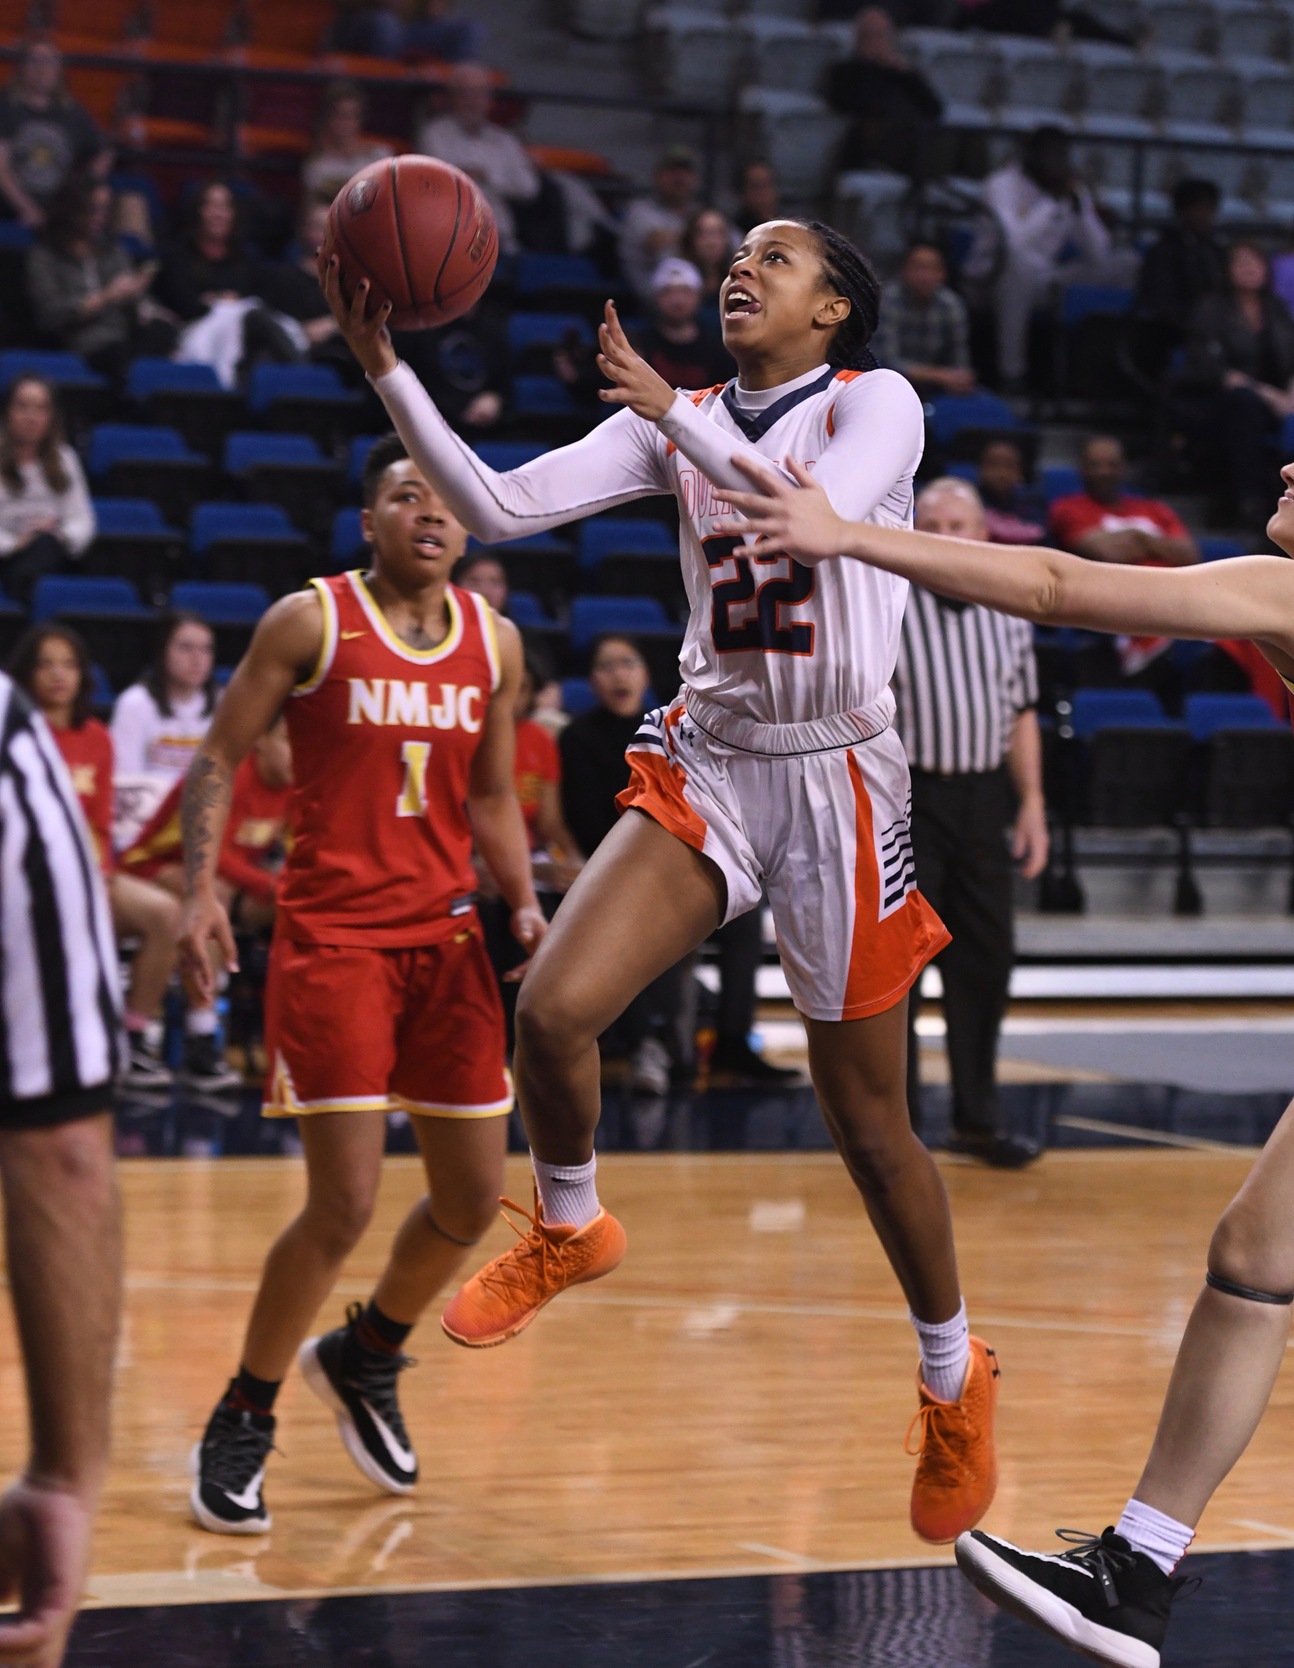 #2 Lady Texans outlast #6 New Mexico Junior College 65-58 in overtime Monday